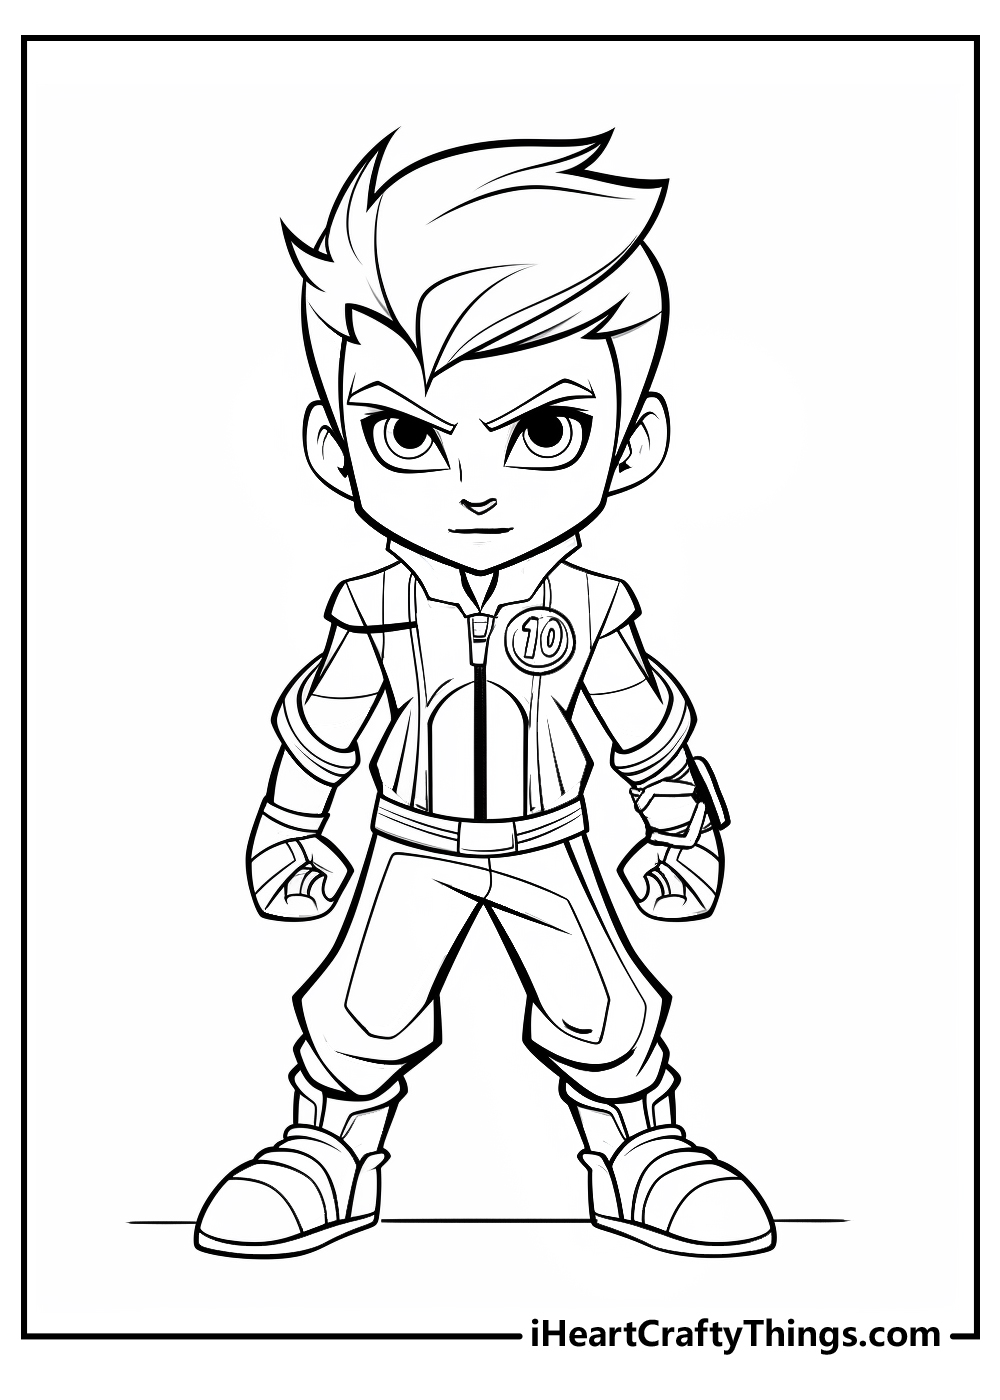 Ben 10 Coloring pages. Download or Print for free, 130 images